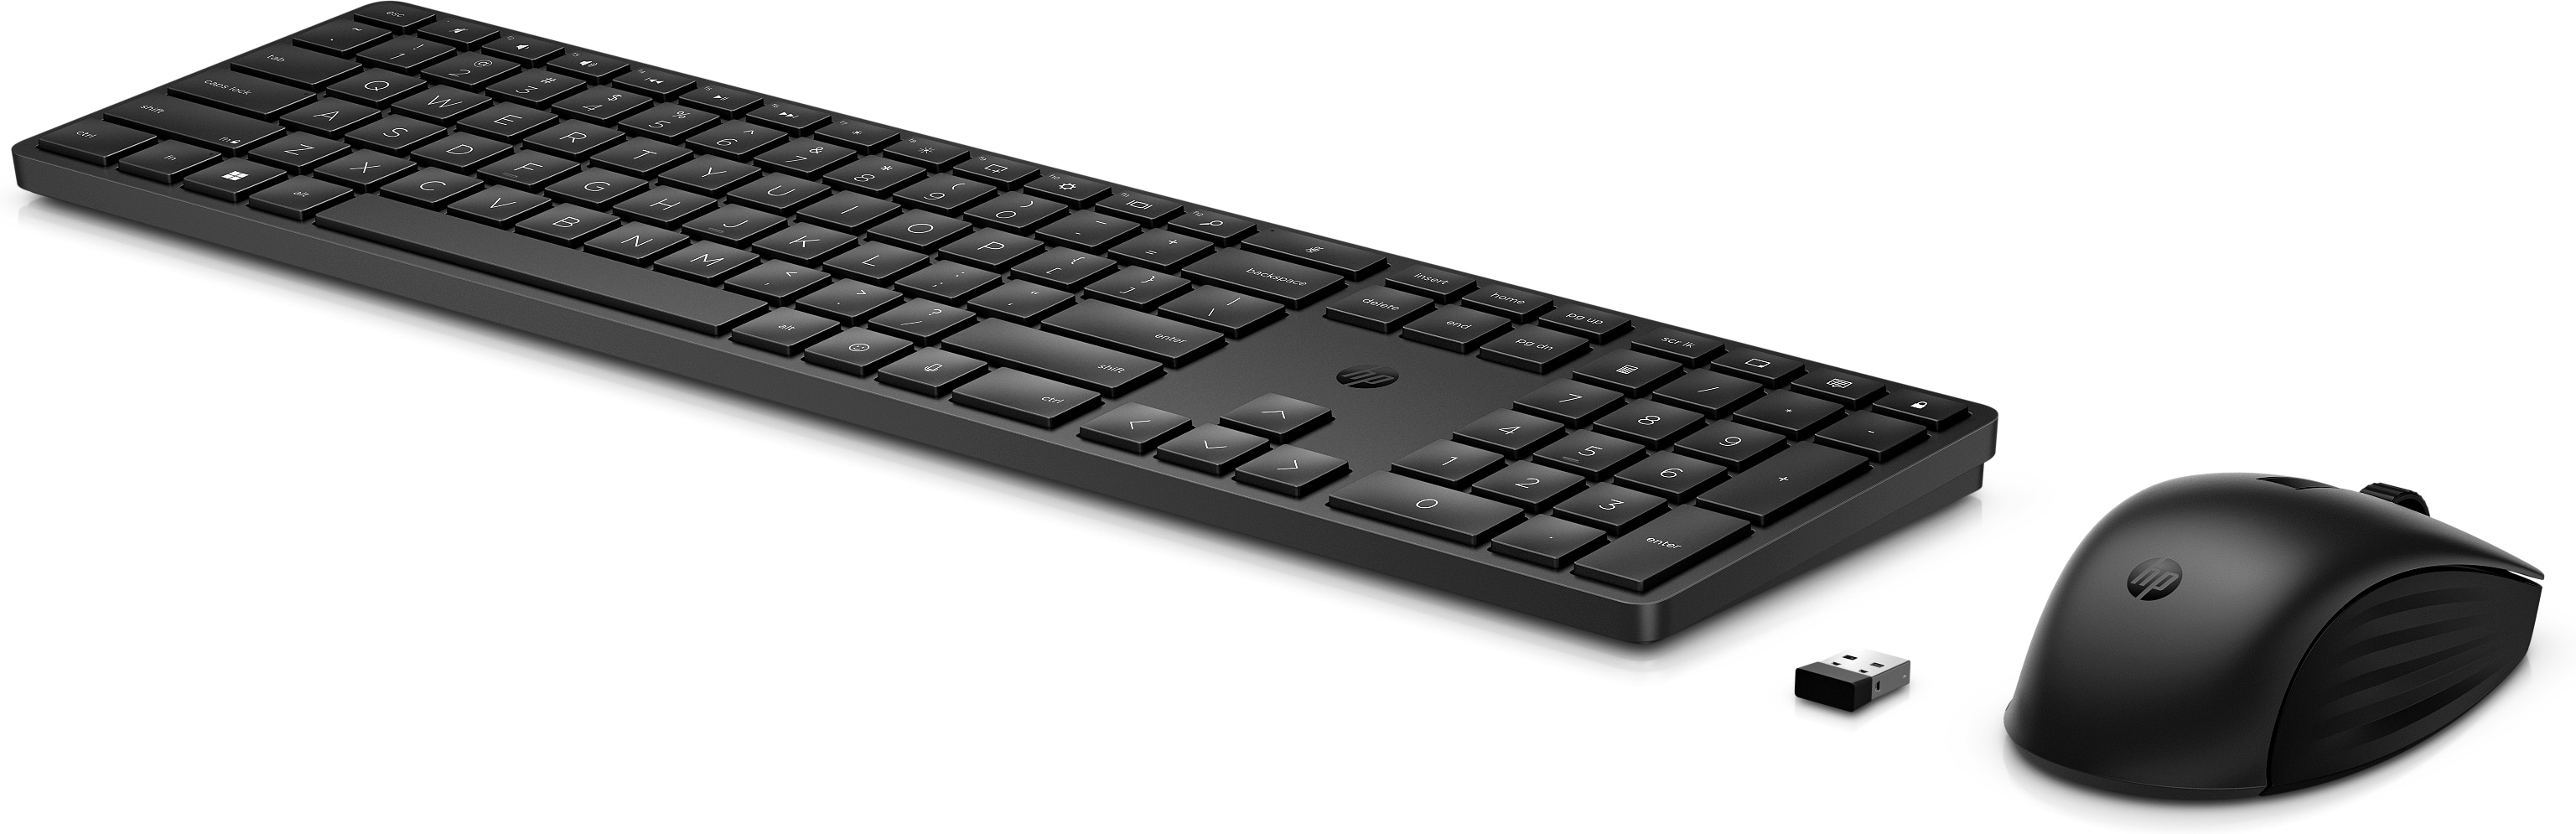 HP 655 Wireless Keyboard and Combo Mouse